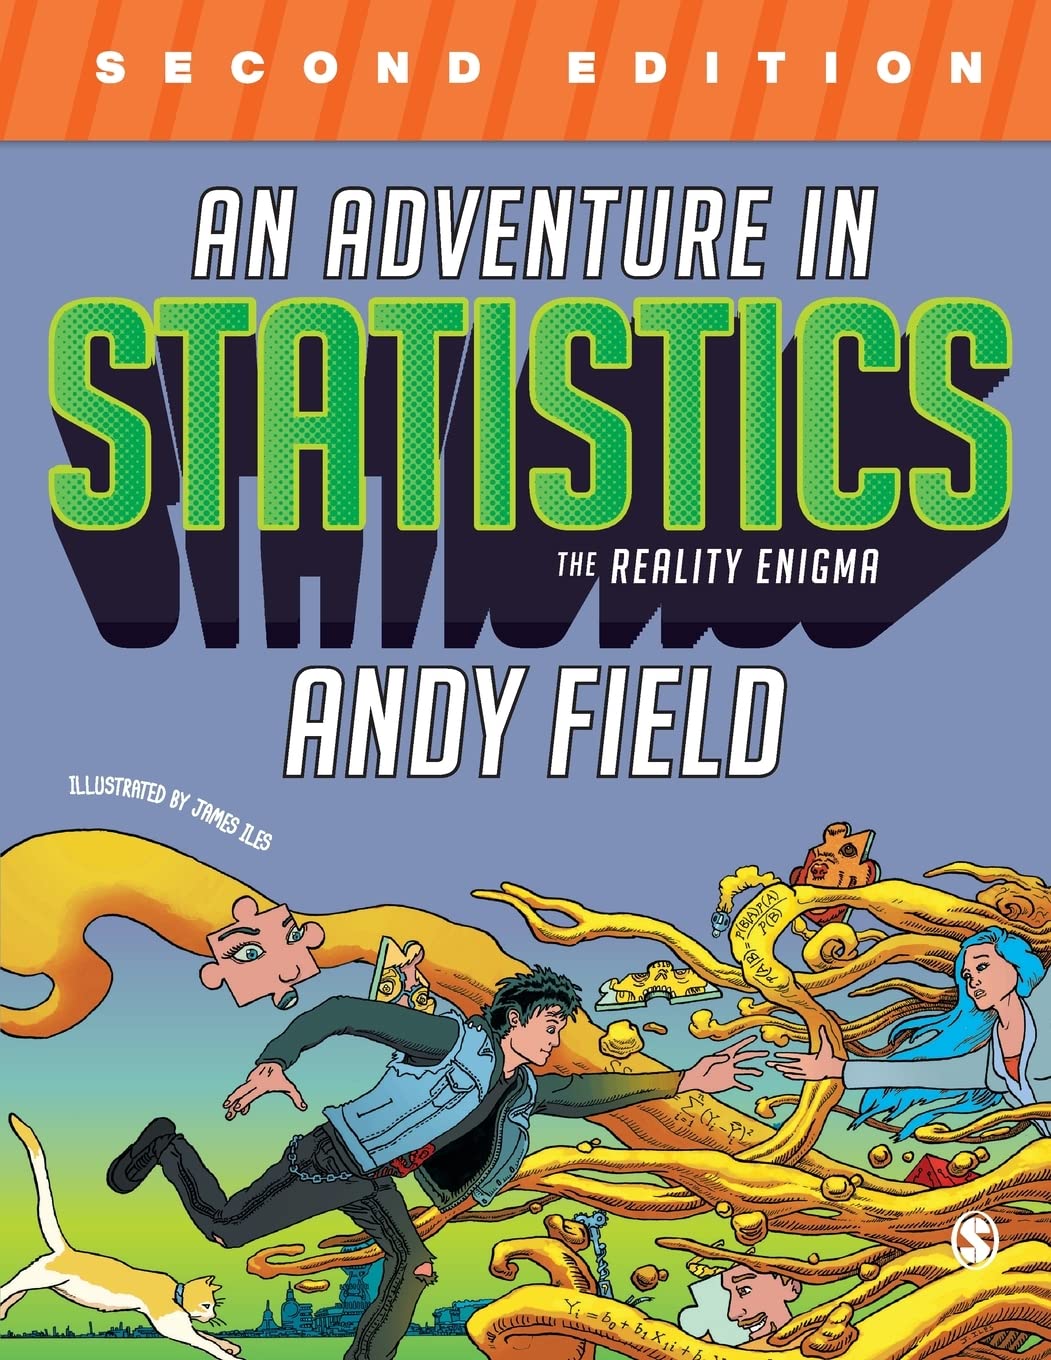 full test bank for An Adventure in Statistics by Field 2e